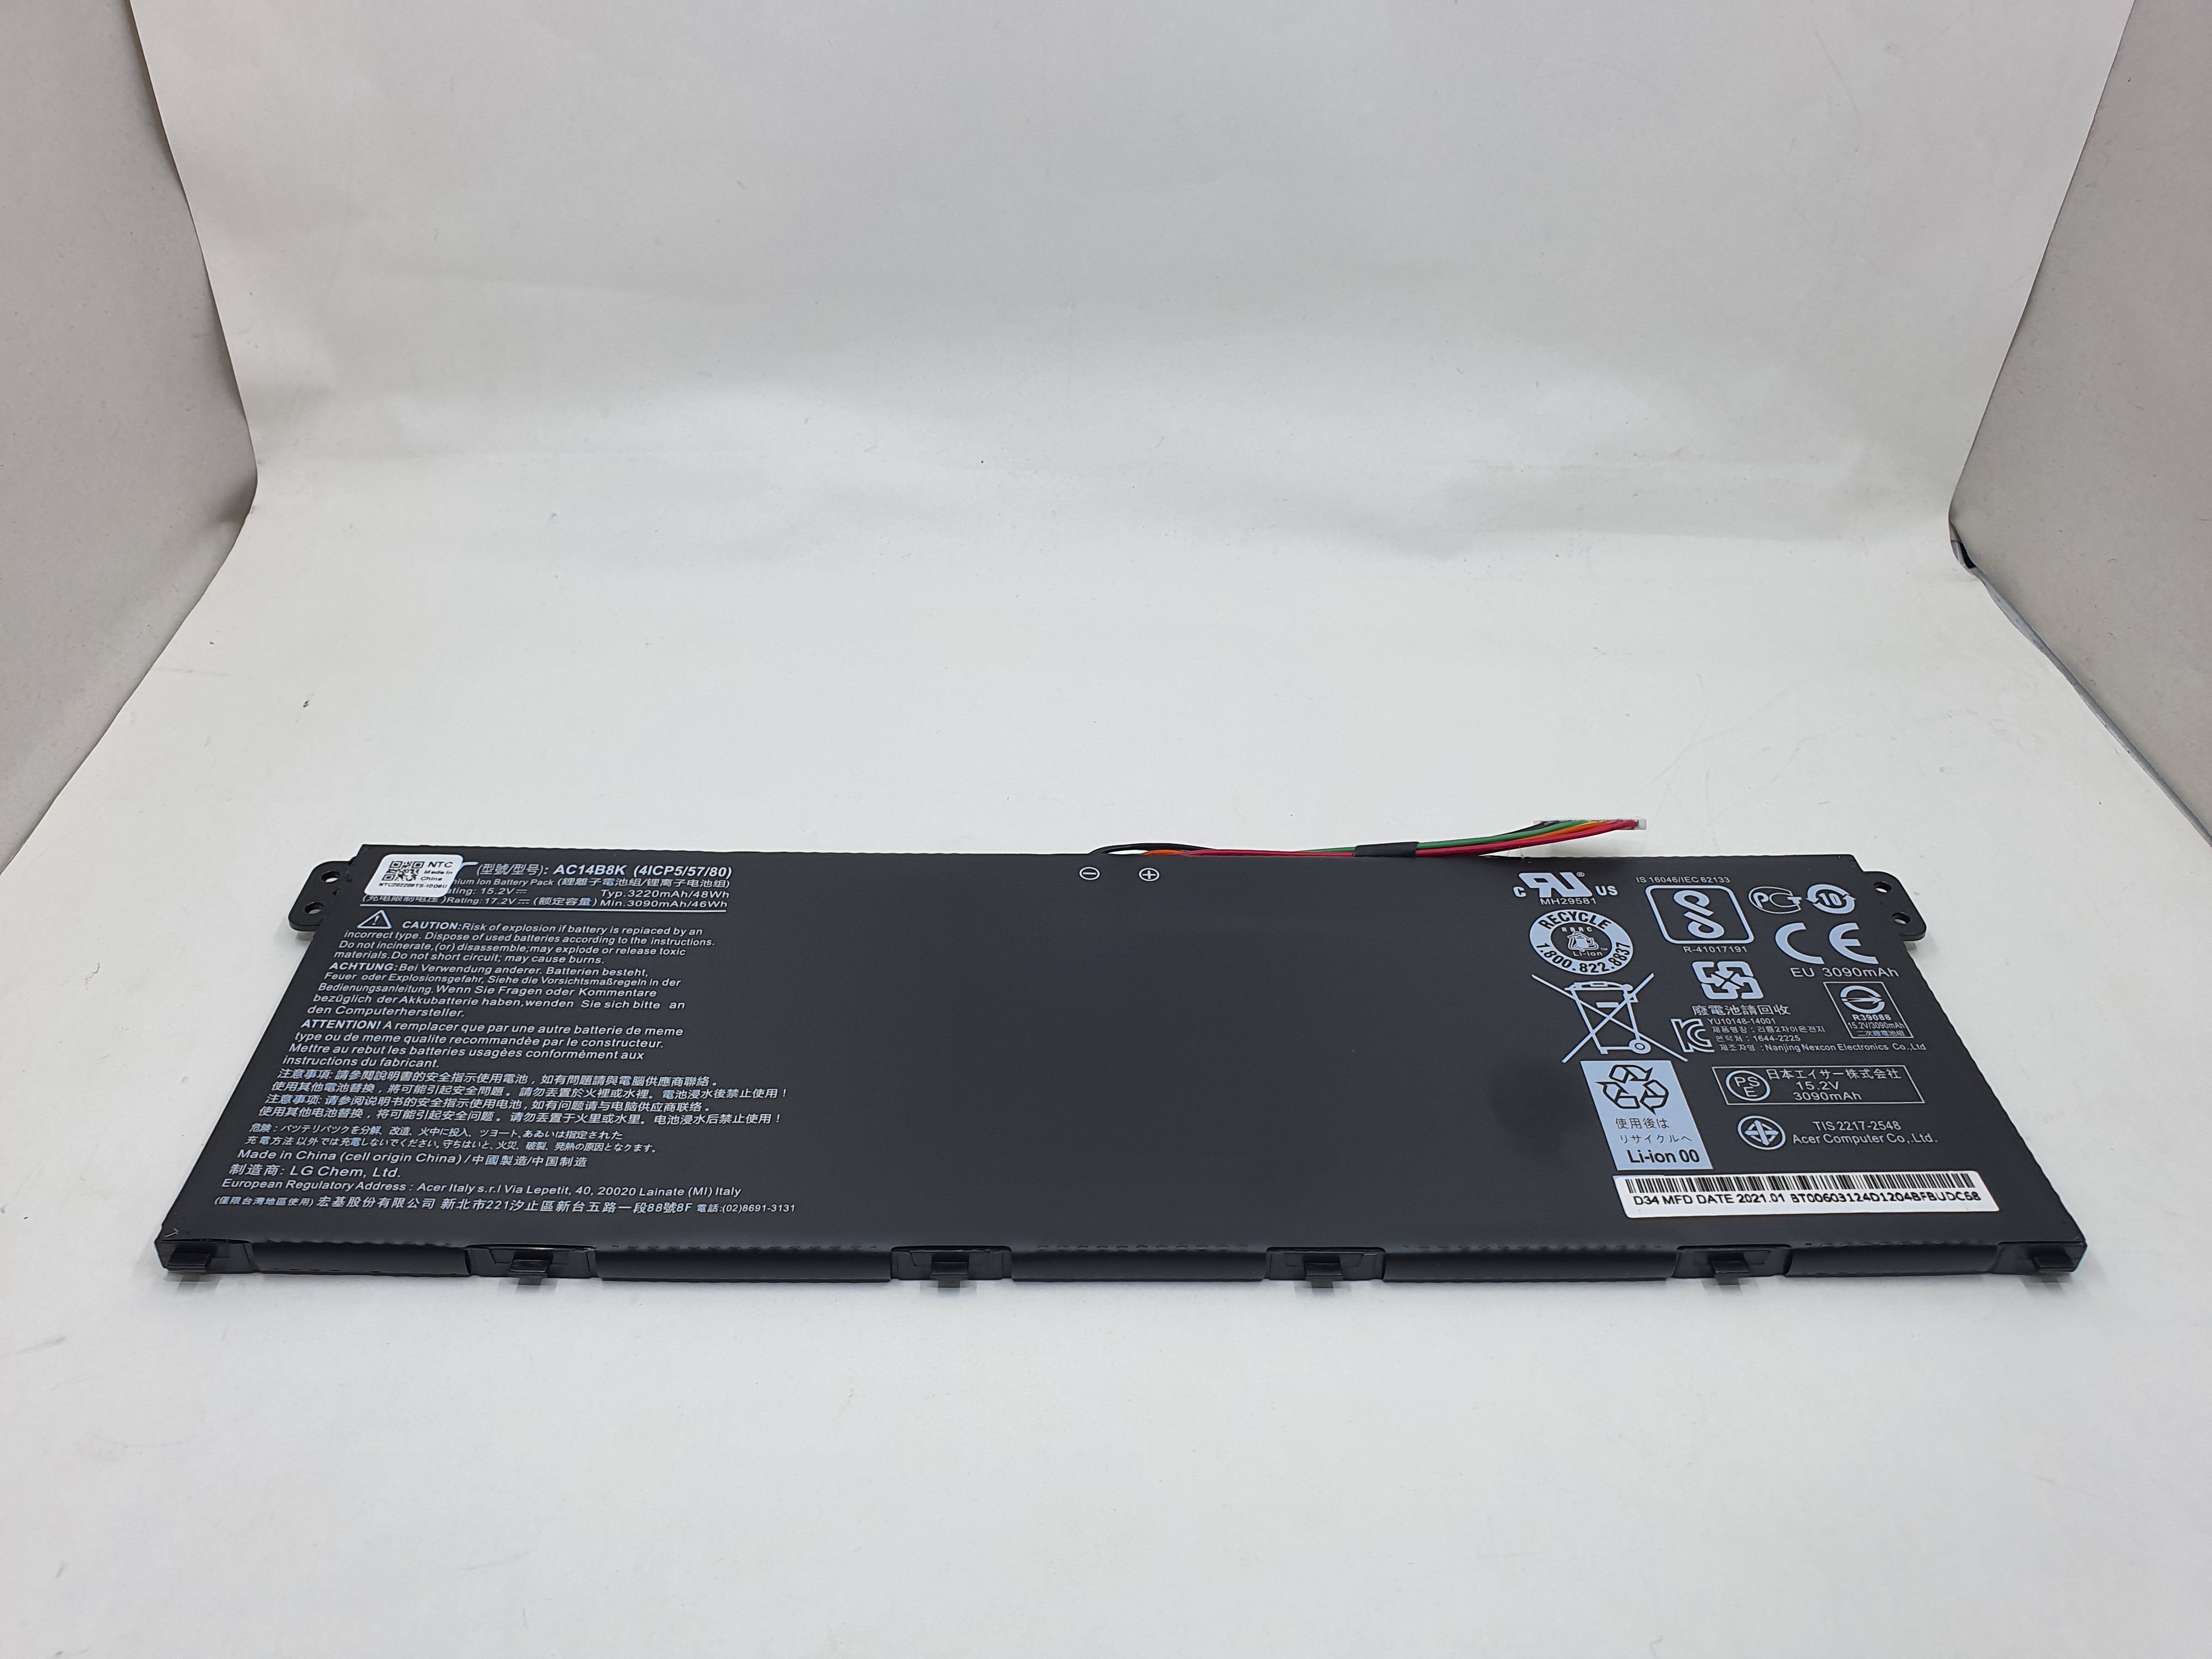 Acer Battery A315-53G WL for Acer Aspire 3 A315-53G-599B